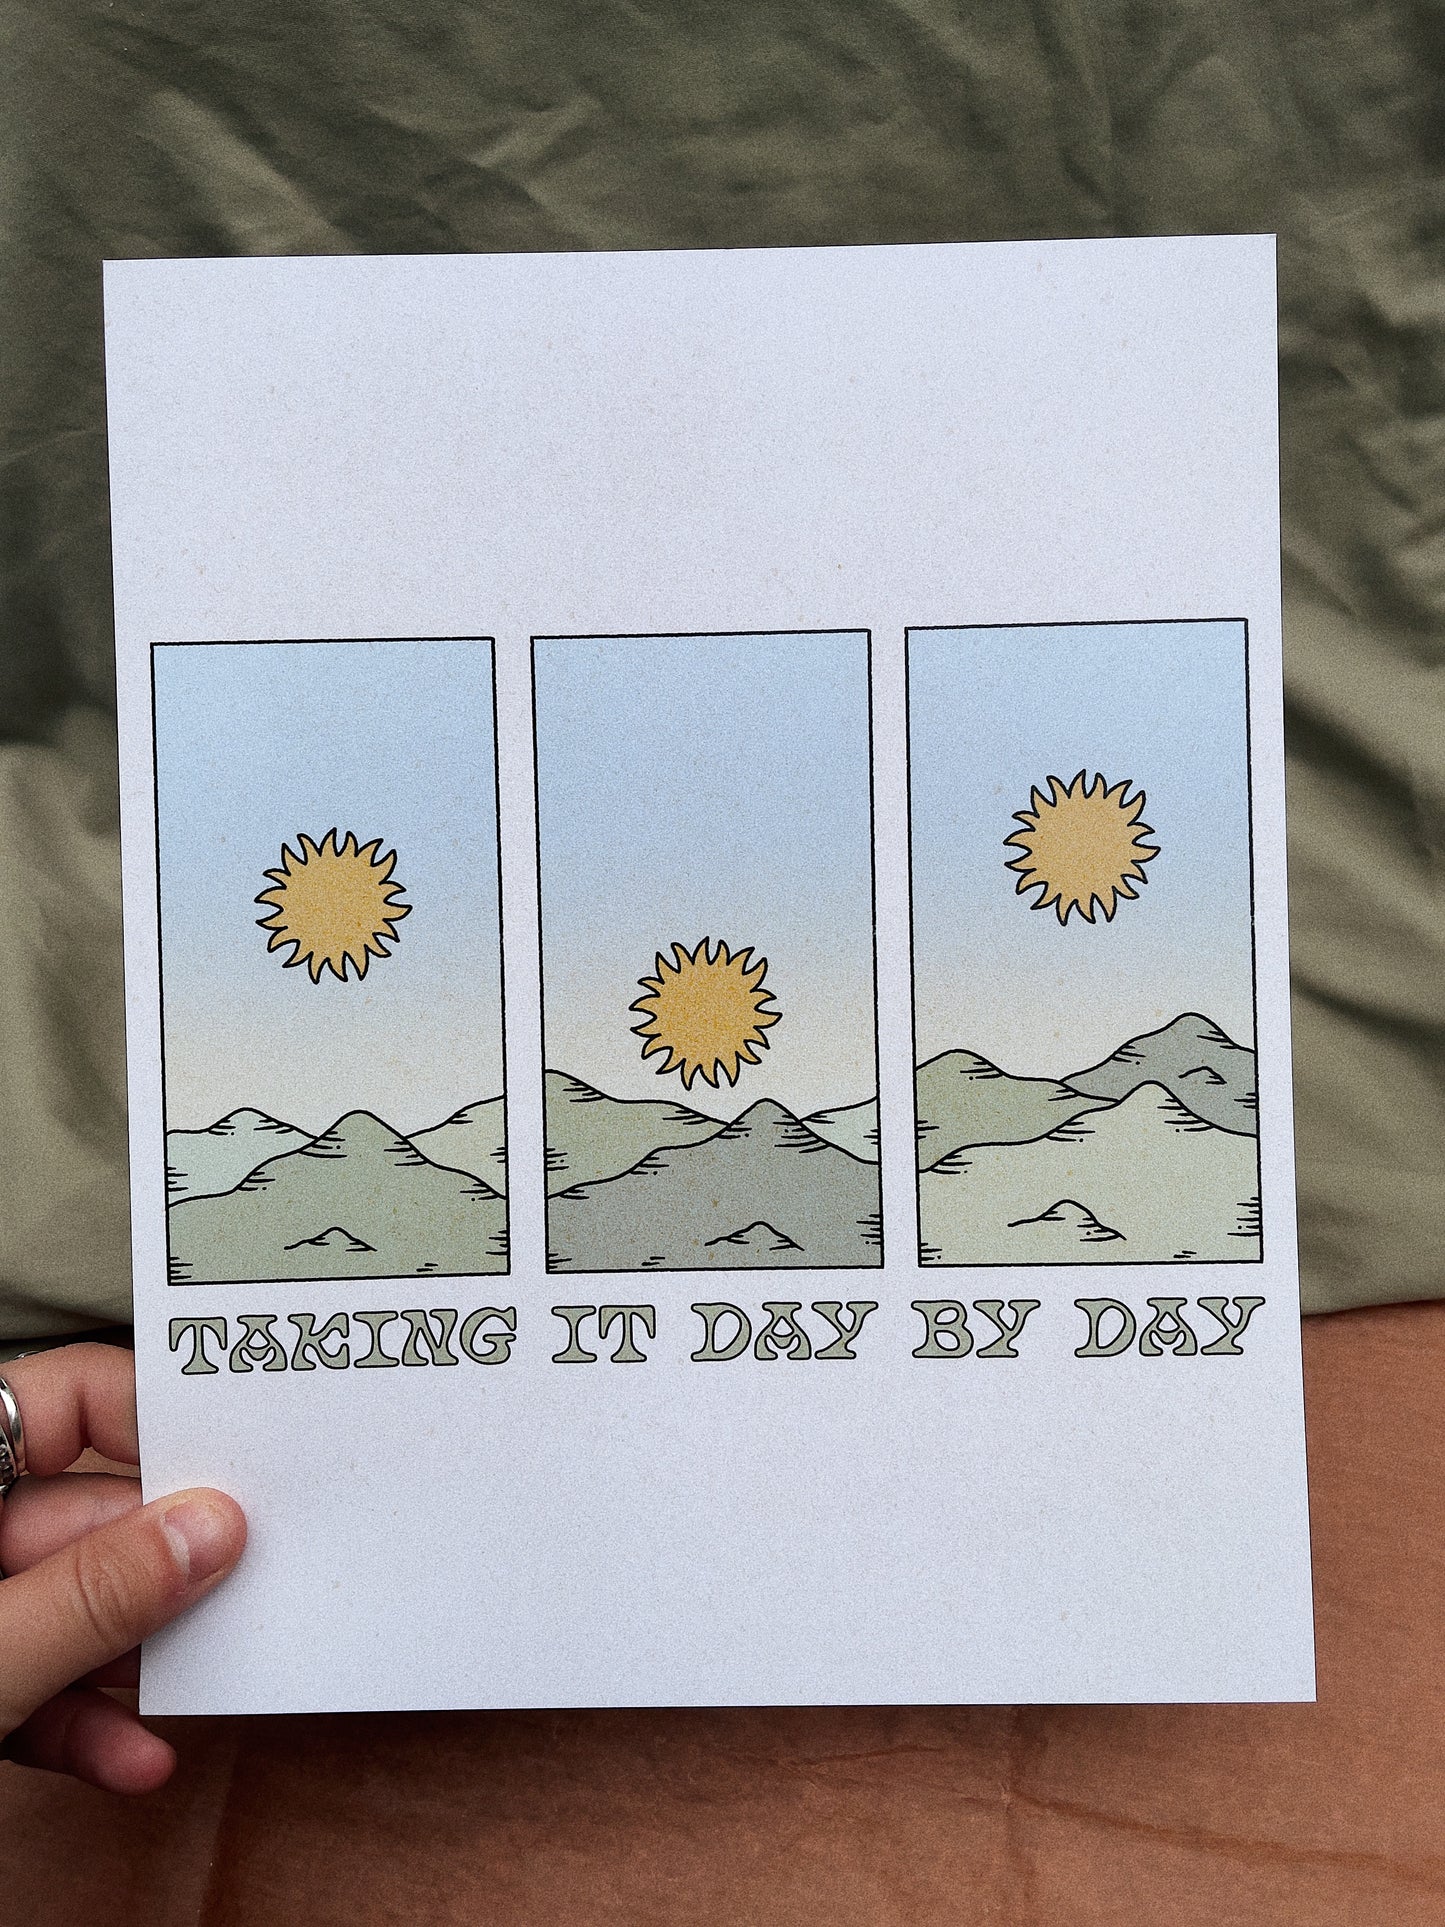 Taking it Day by Day Print